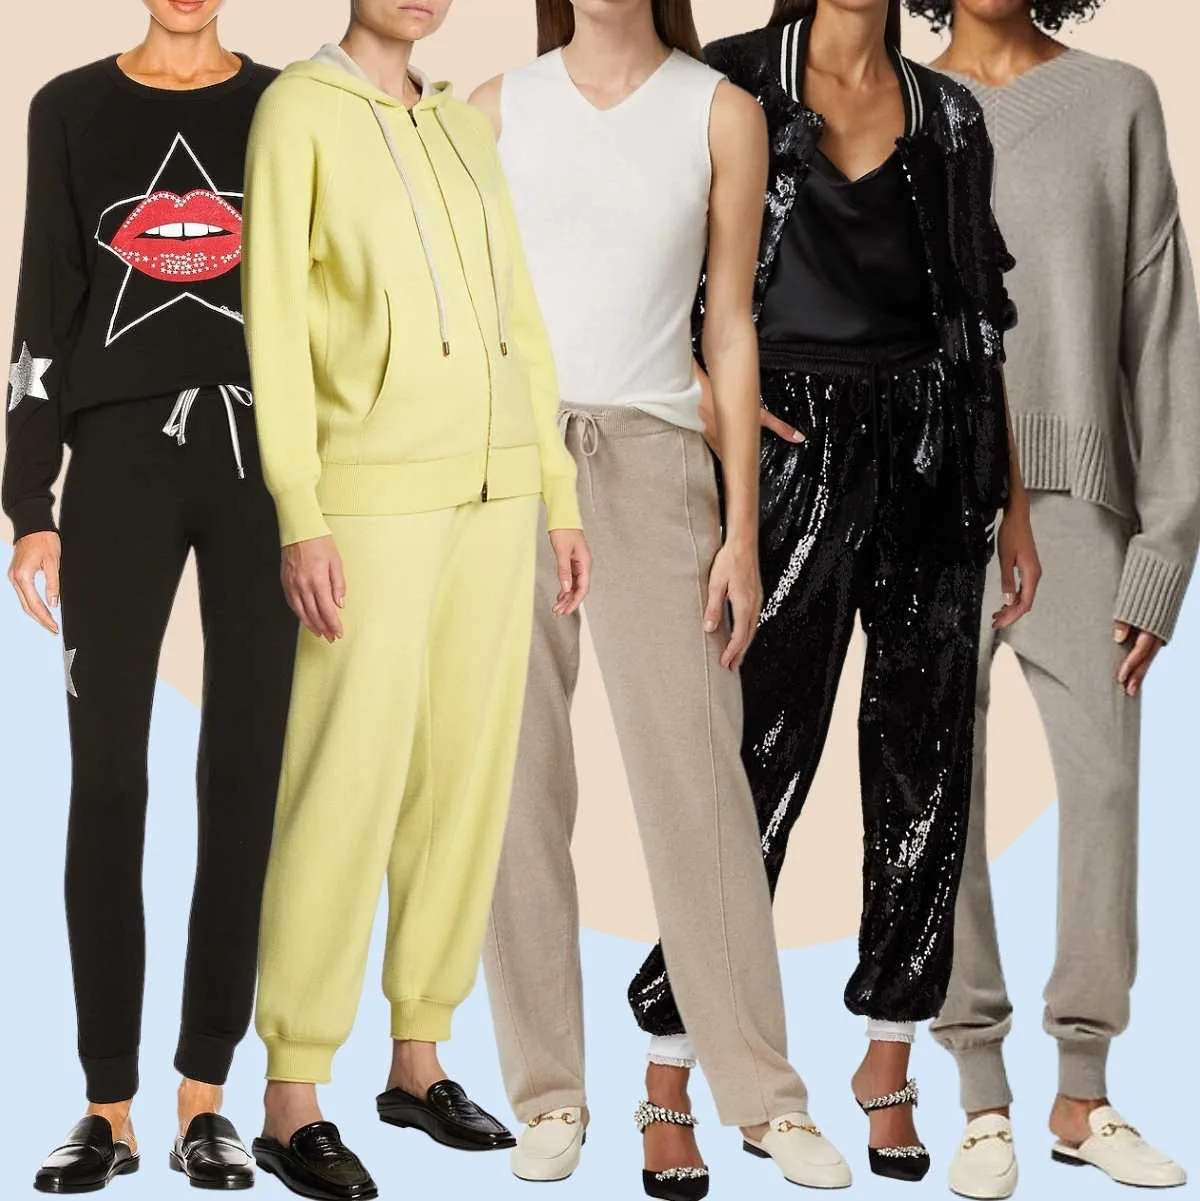 Collage of 5 women wearing different mules outfits with joggers and sweatpants.